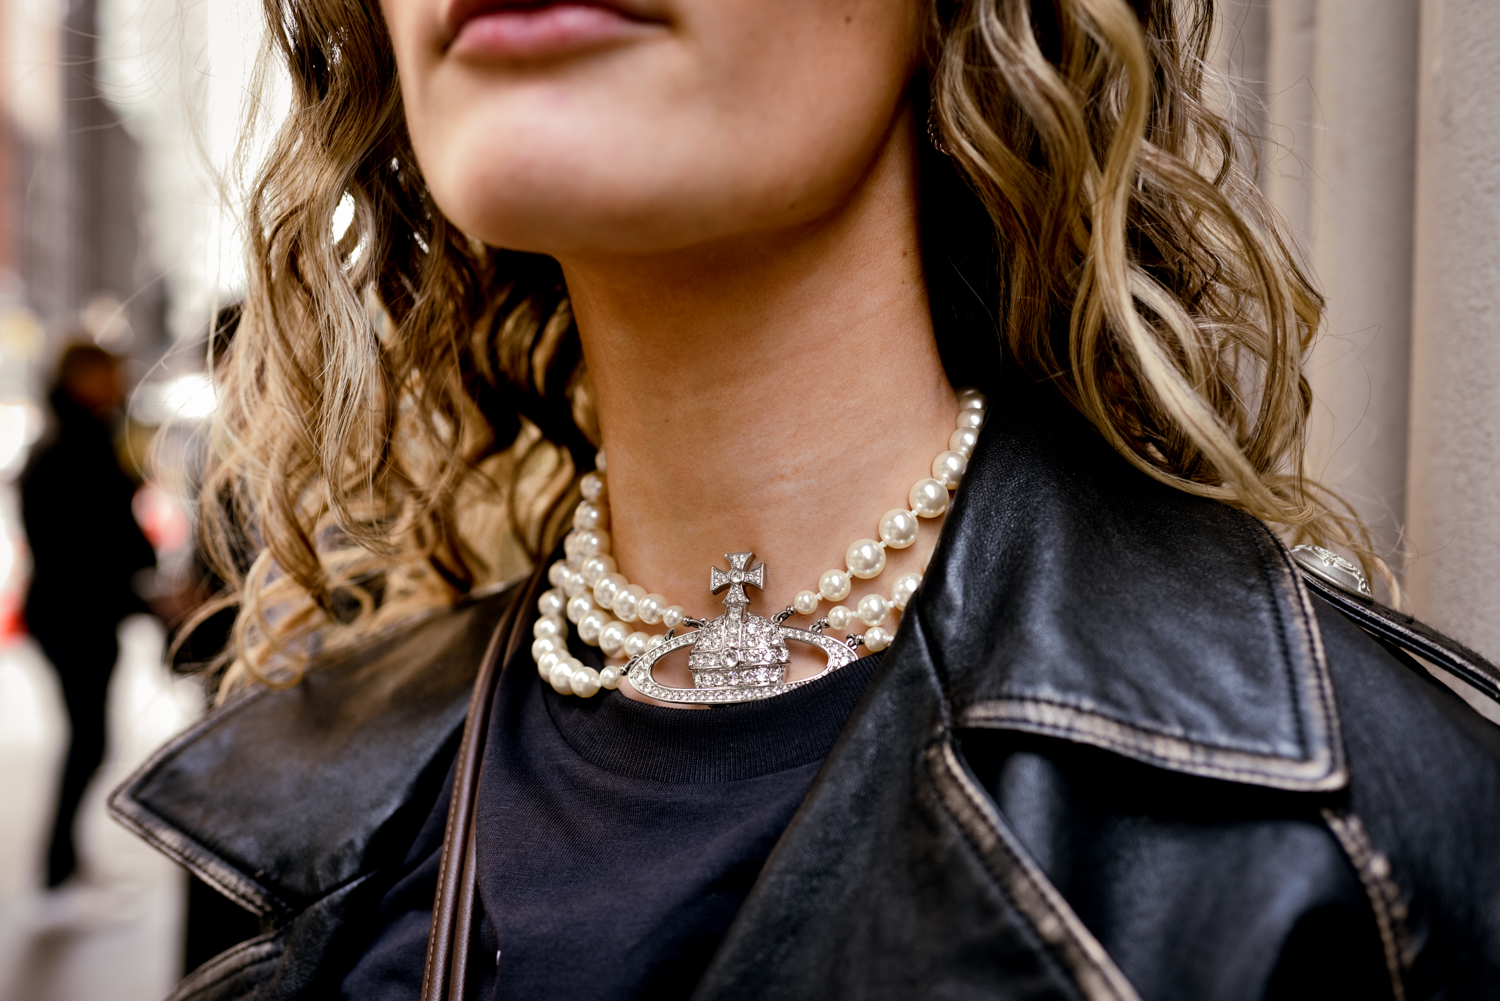 Hallie Smith stands and shows off her necklace, the Three Row Pearl Bas Relief Choker by Vivienne Westwood.